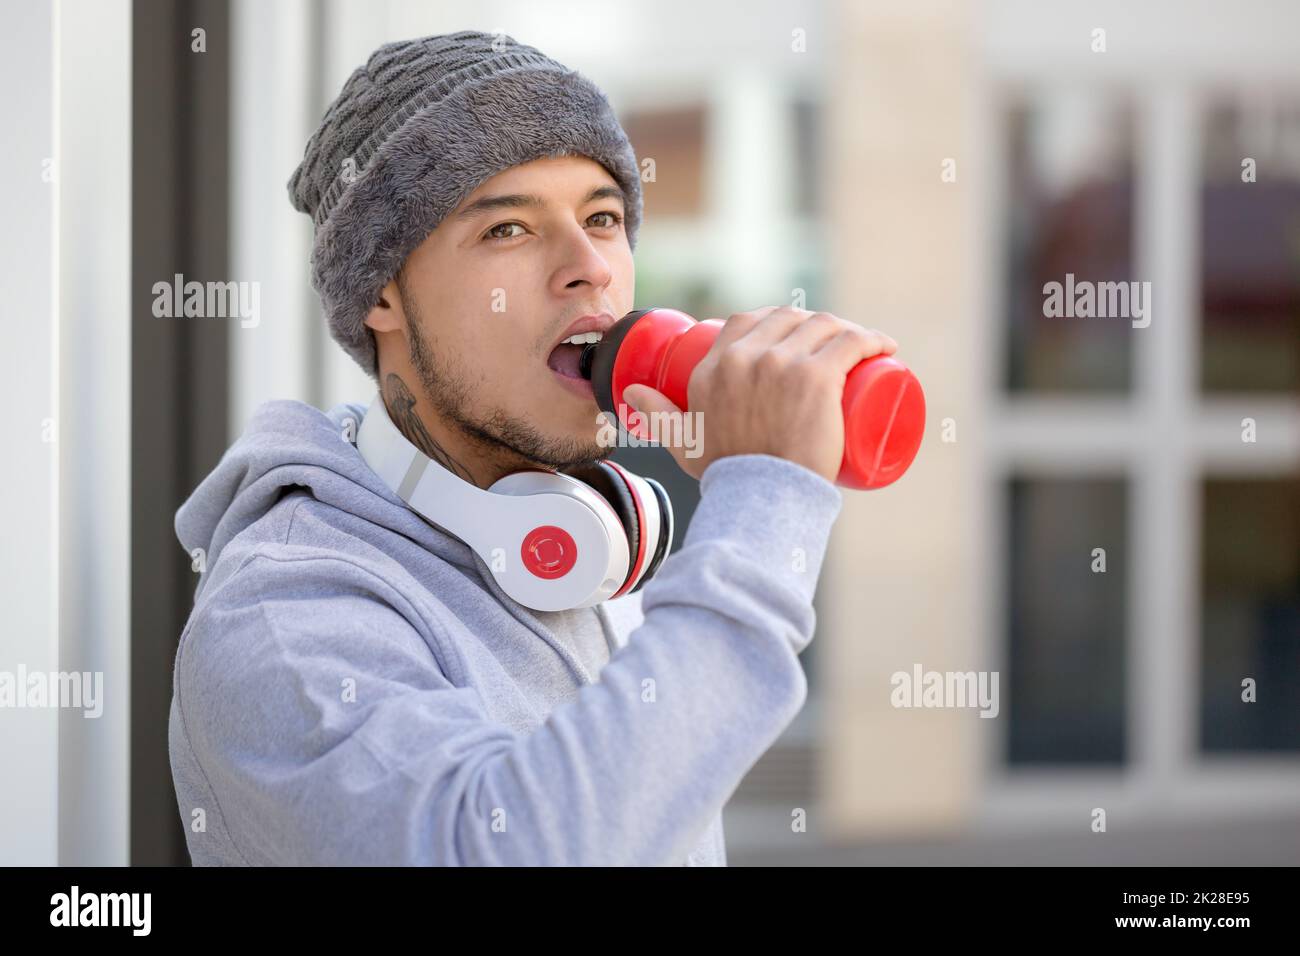 Drinking water young man runner copyspace copy space winter cold sports training fitness Stock Photo